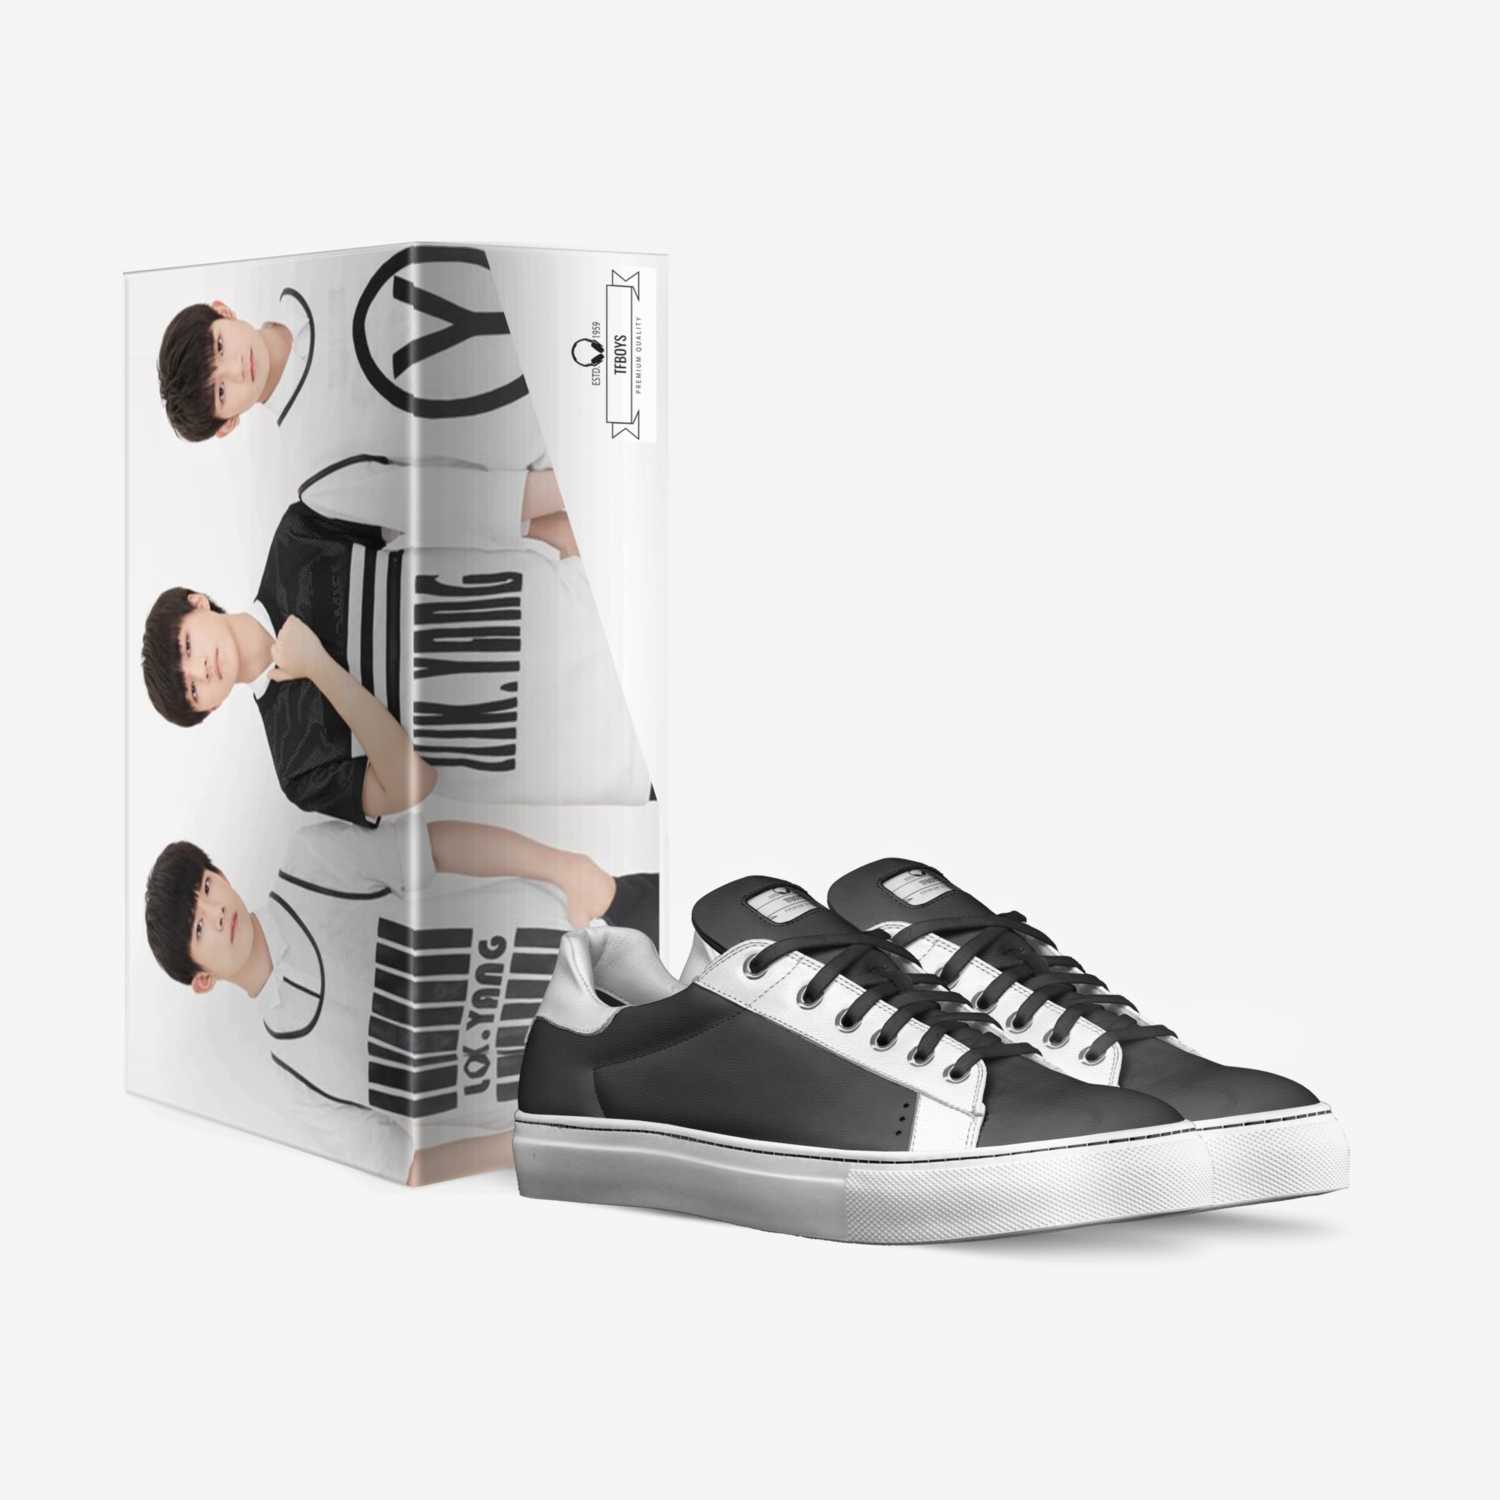 TFBOYS custom made in Italy shoes by Anna Nguyen | Box view